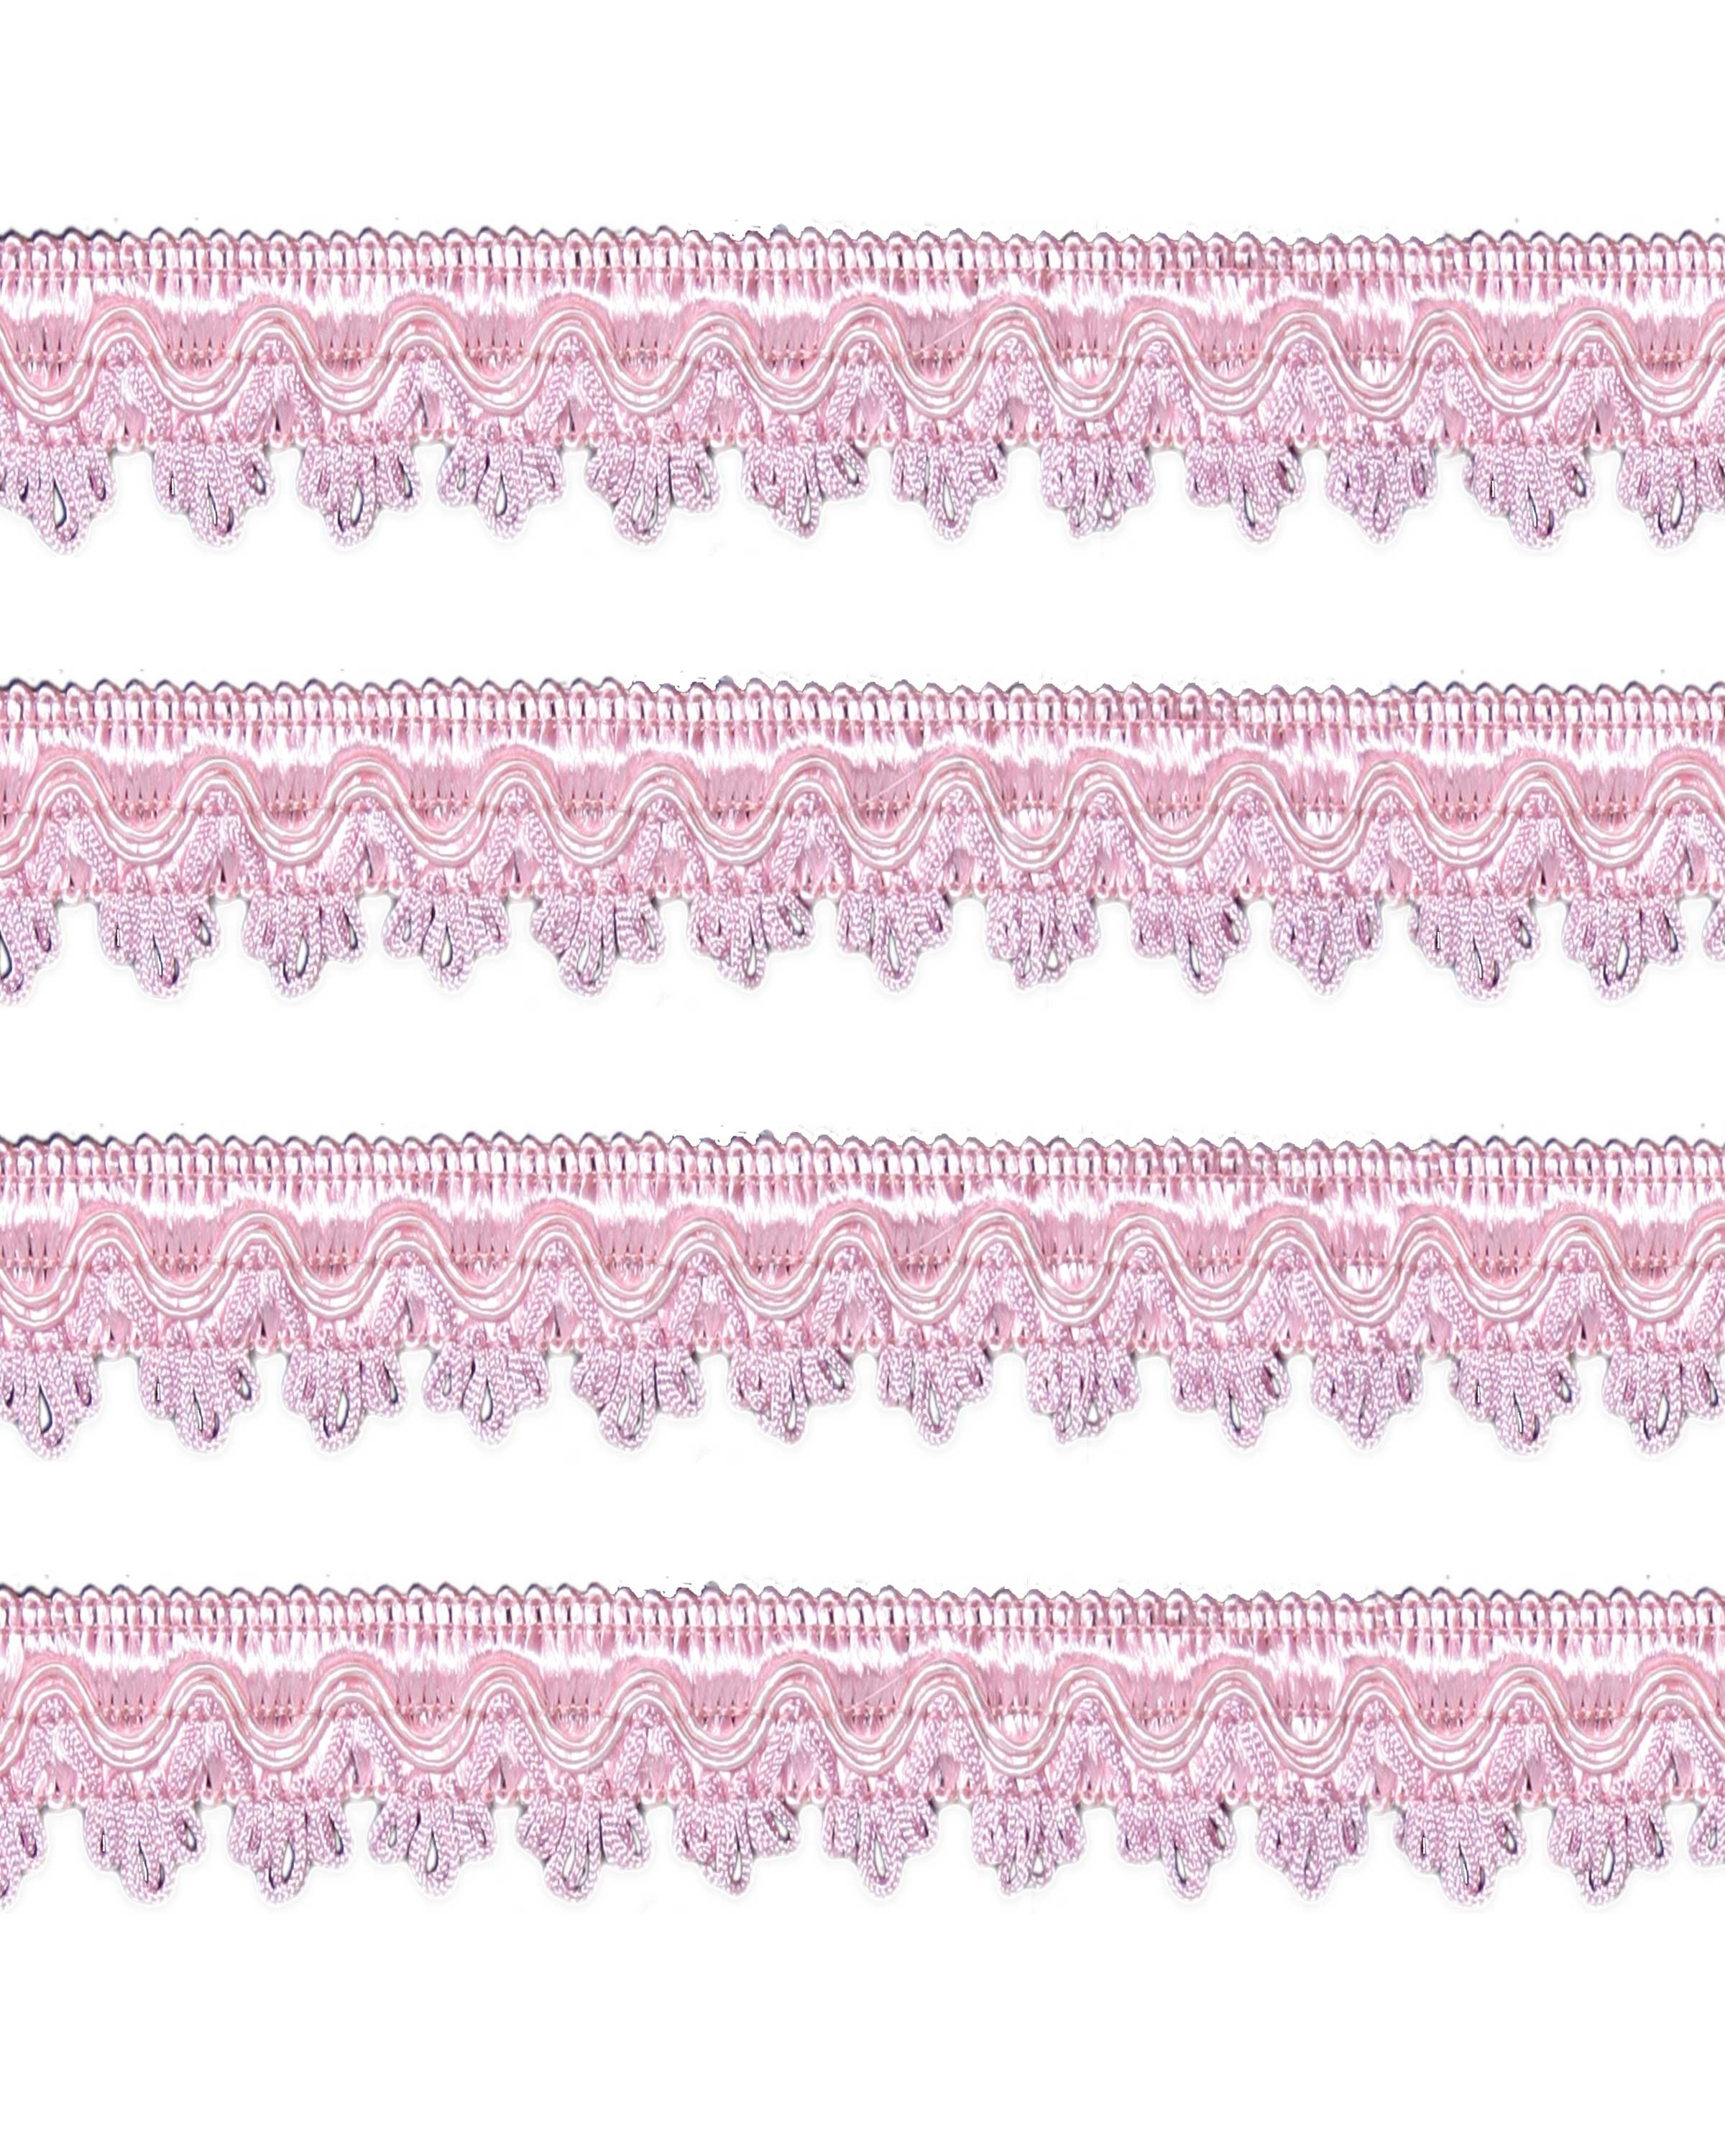 Large Fancy Braid - Dusky Pink 27mm Price is for 5 metres